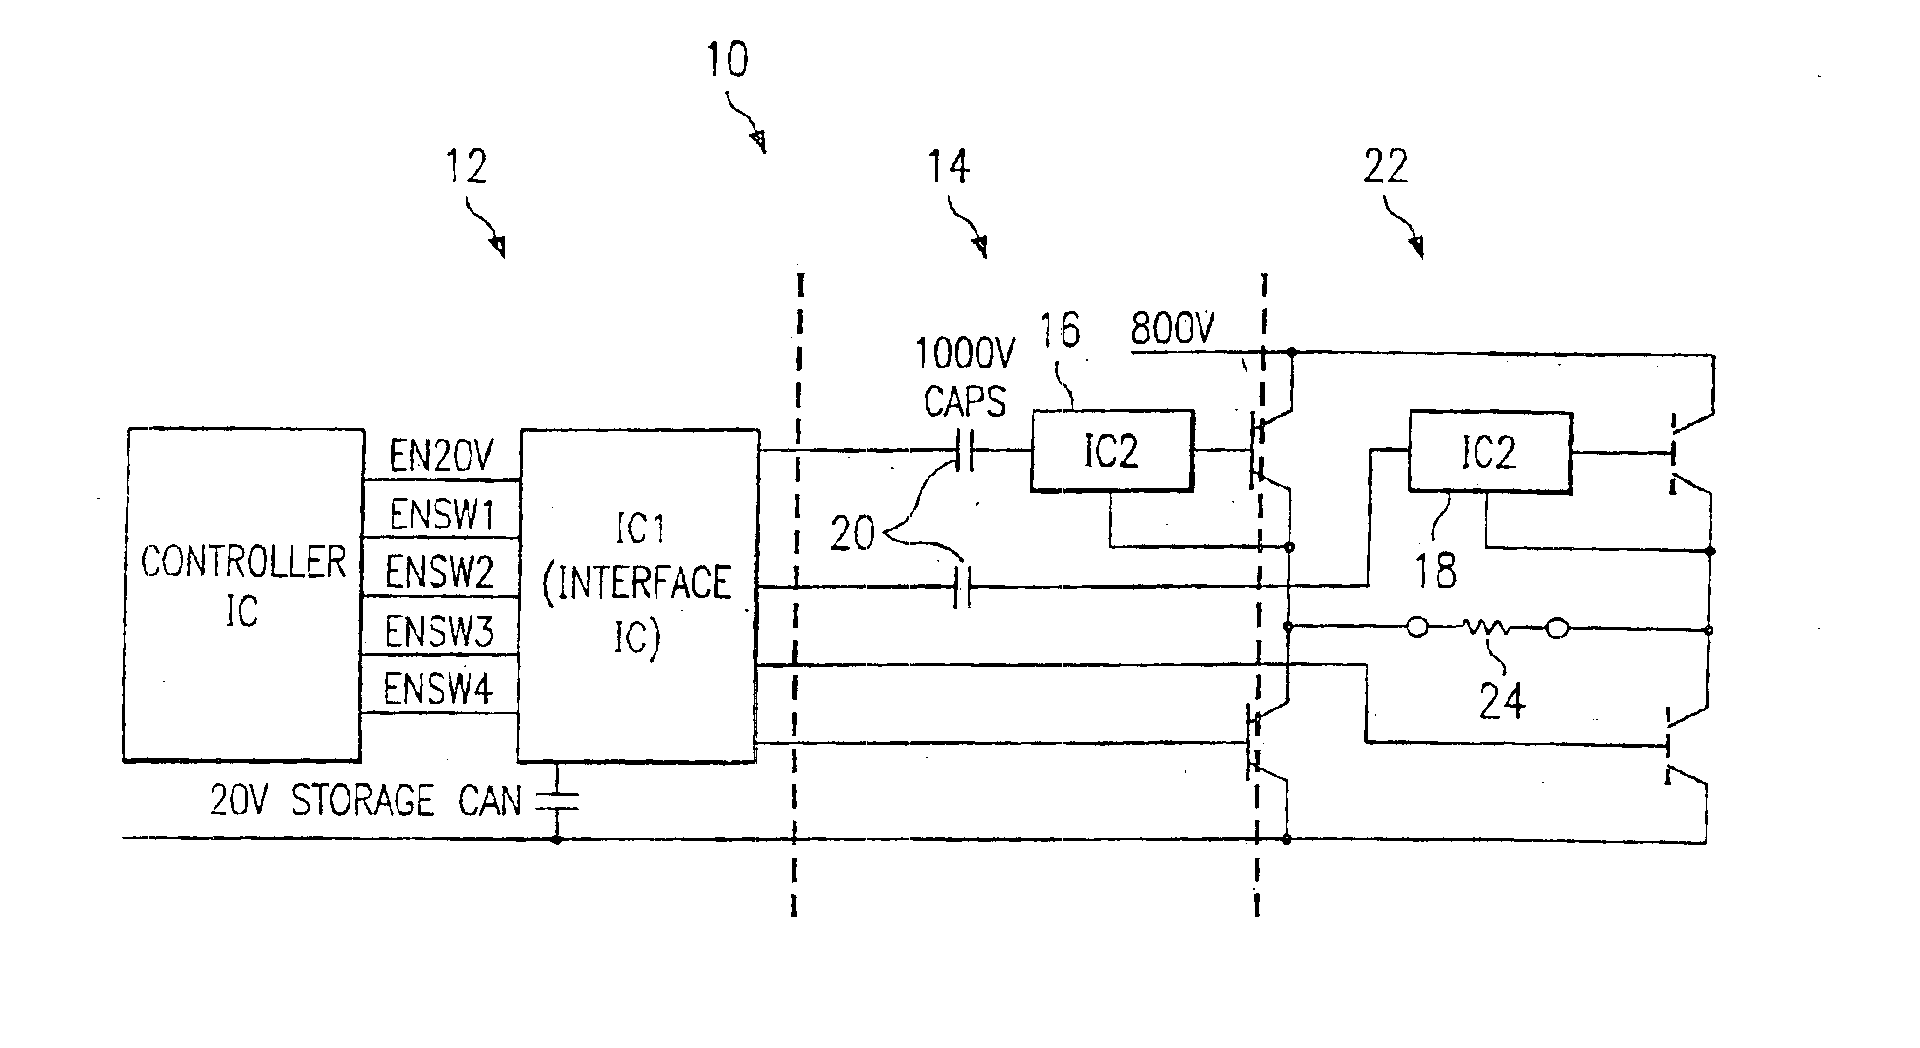 Power supply with control circuit for controlling a high voltage circuit using a low voltage circuit